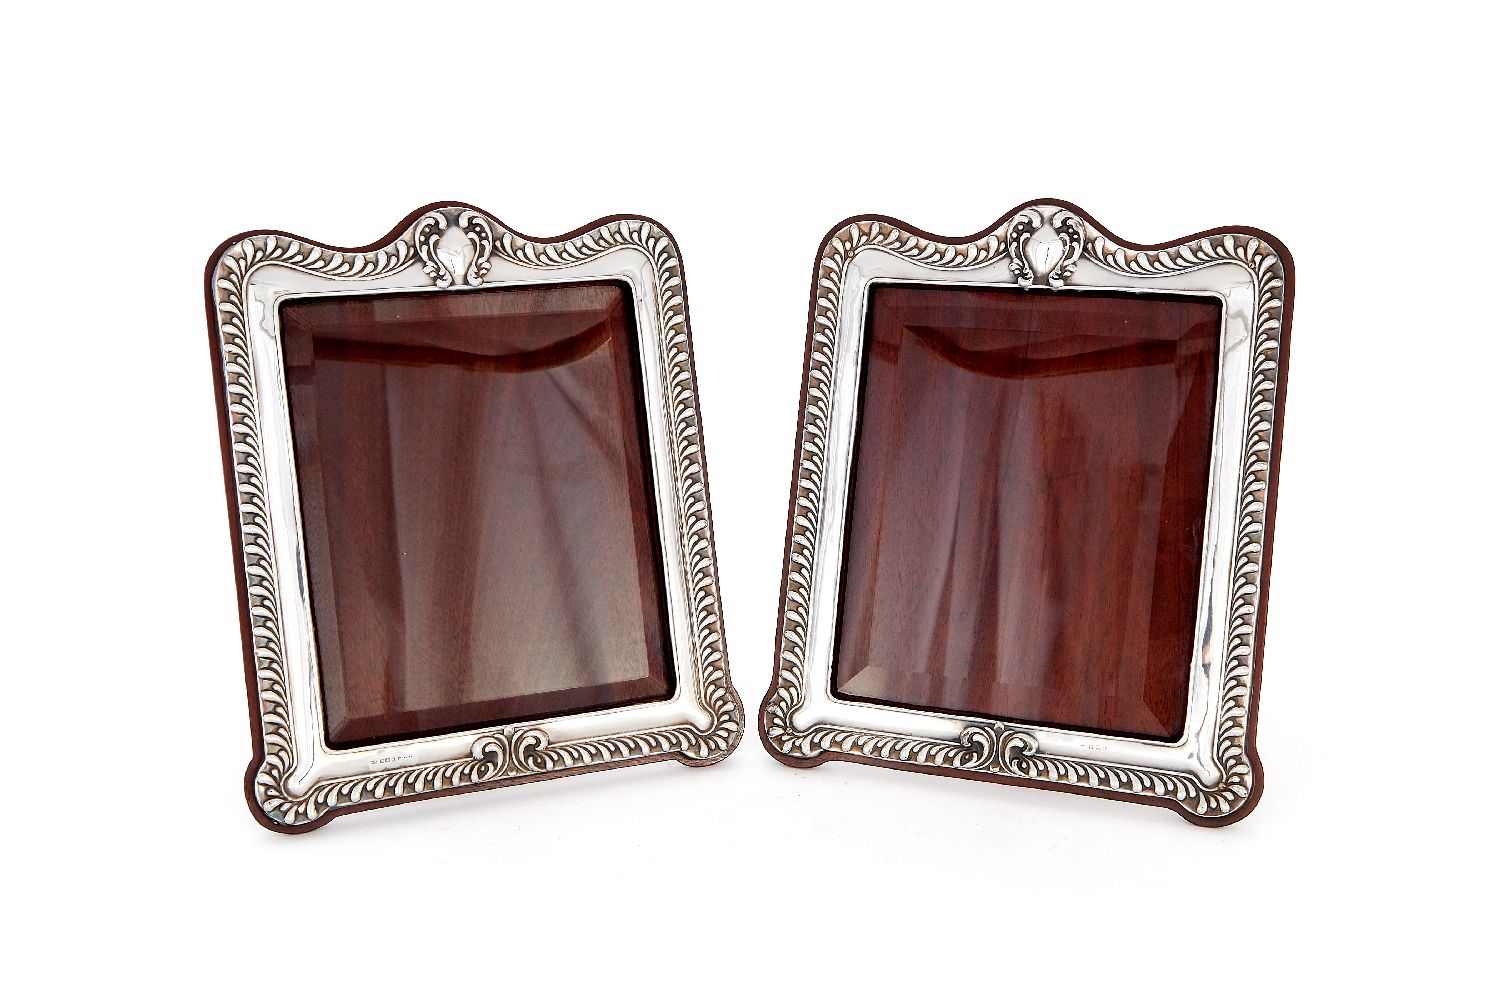 A matched pair of turn-of-the-century silver photograph frames by William Neale & Son